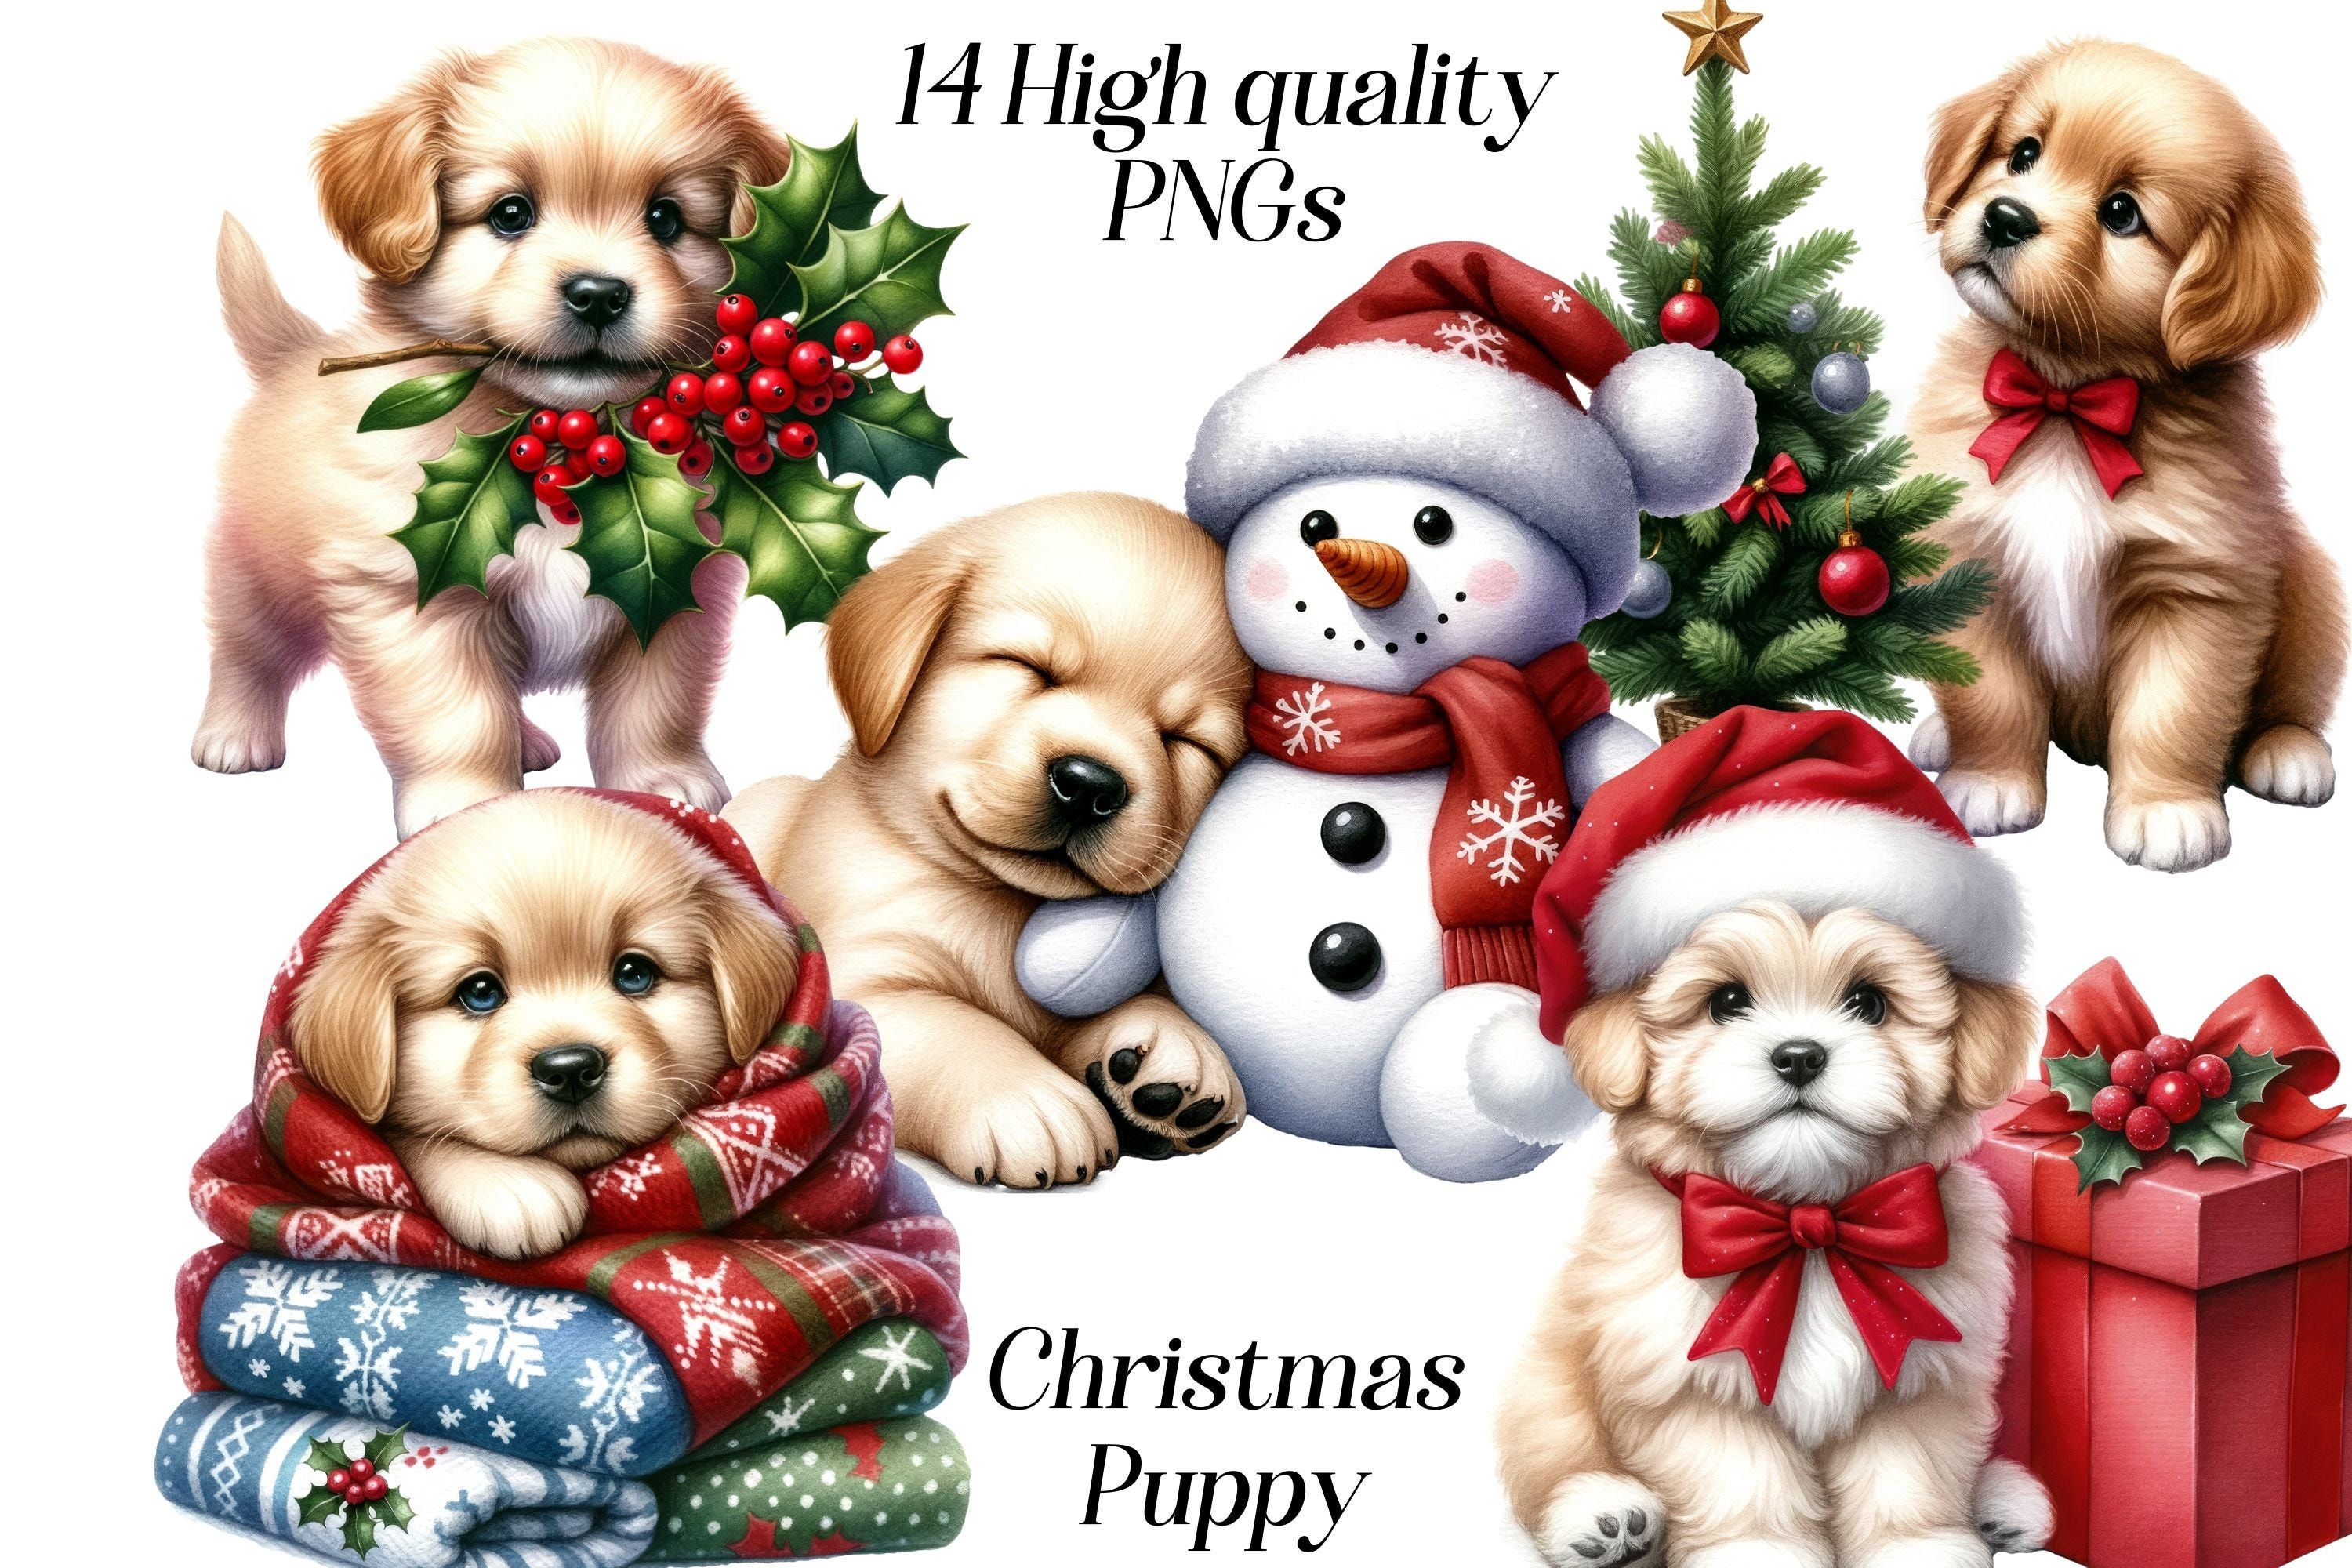 Watercolor Christmas Puppy clipart, 14 high quality PNG files, christmas graphics, cute puppy images, winter festives, printables